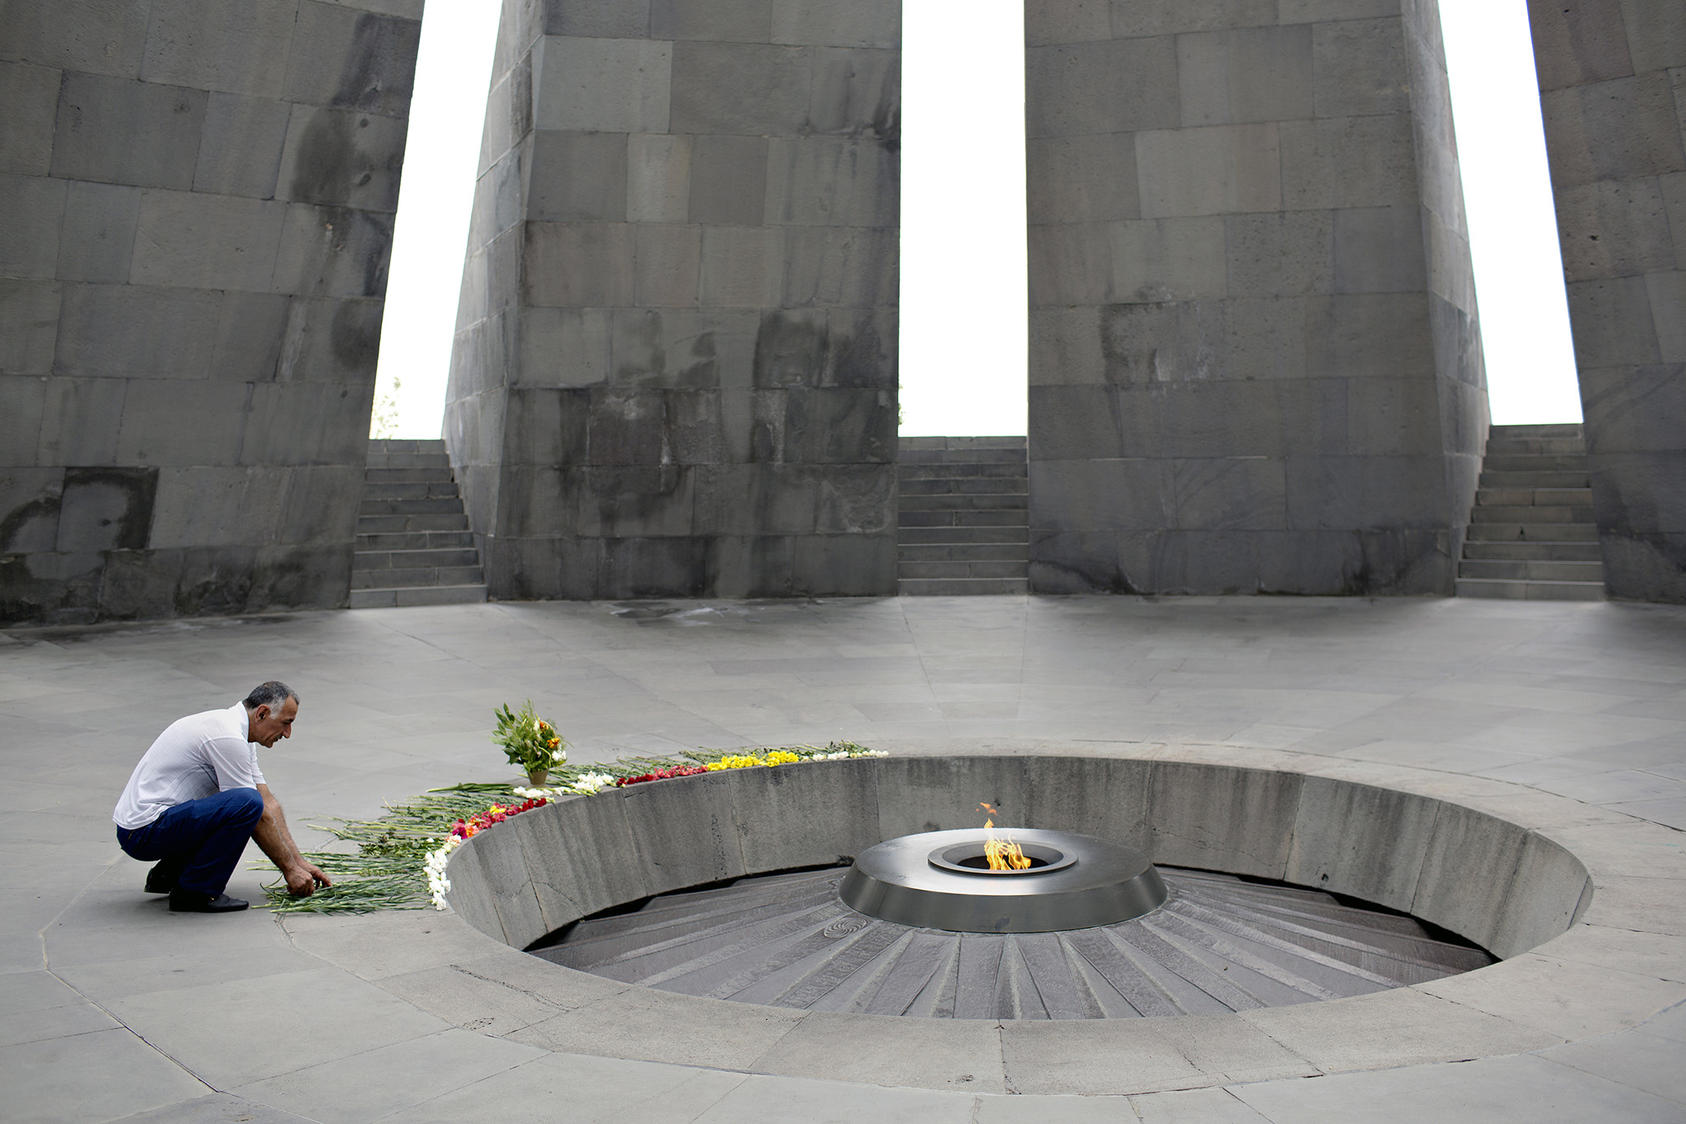 A man places flowers at the eternal flame in the Armenian Genocide memorial complex in Yerevan, Armenia, on Aug. 11, 2018. (Danielle Villasana/The New York Times)